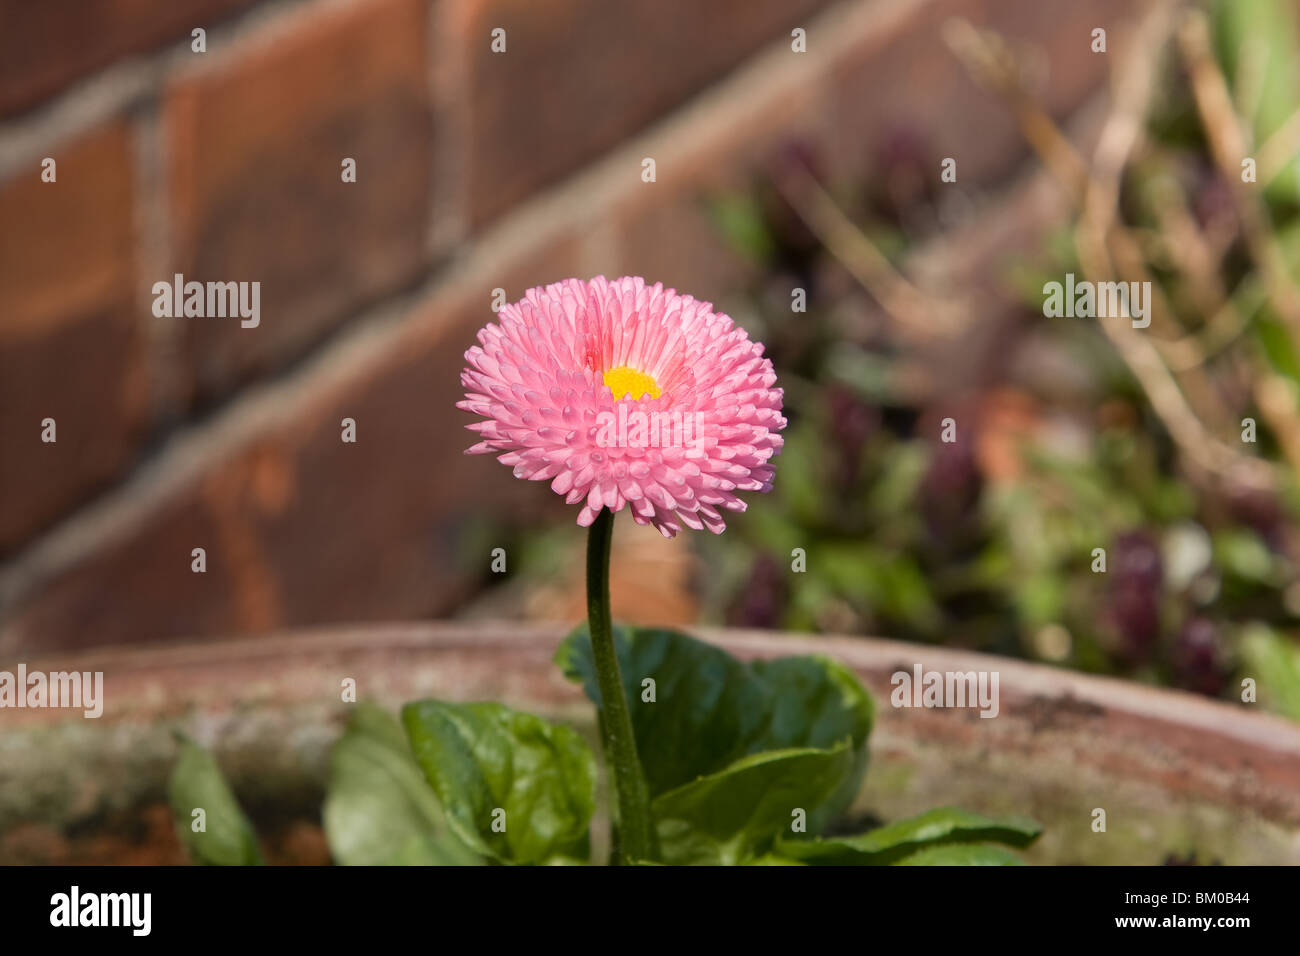 The pink rosette of the Bellis Stock Photo